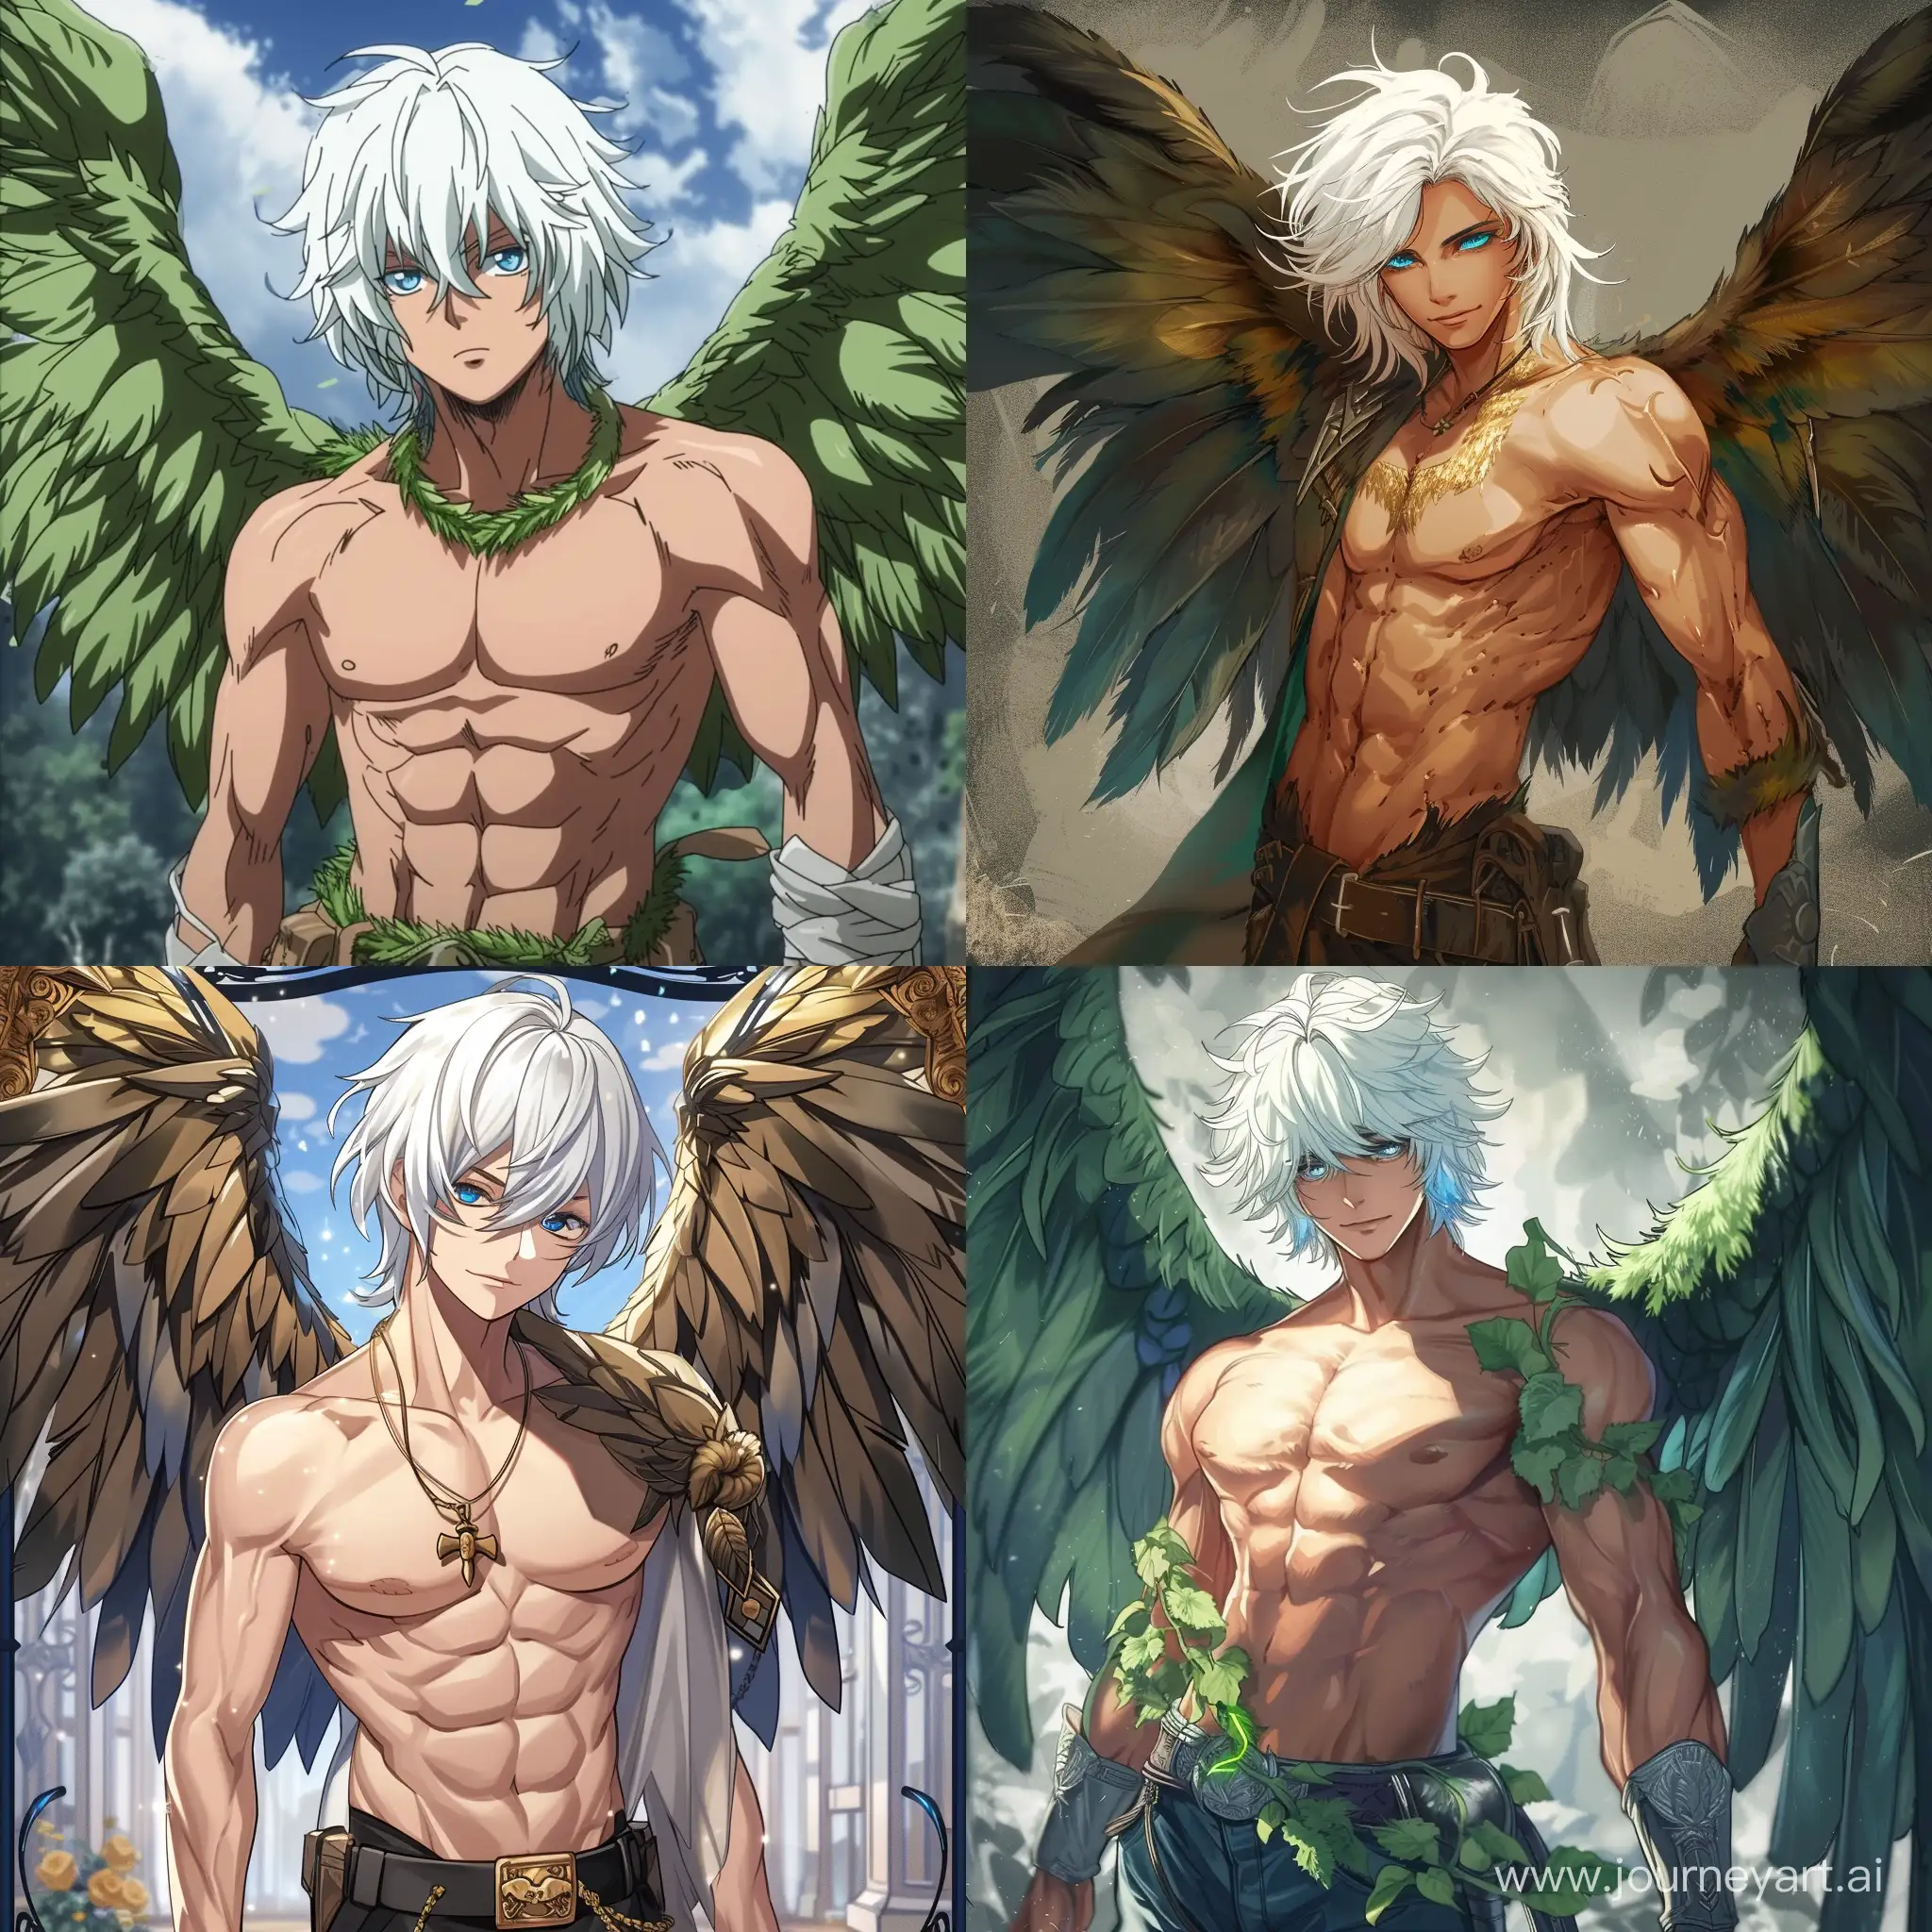 Commanding-Angel-with-White-Hair-and-Blue-Eyes